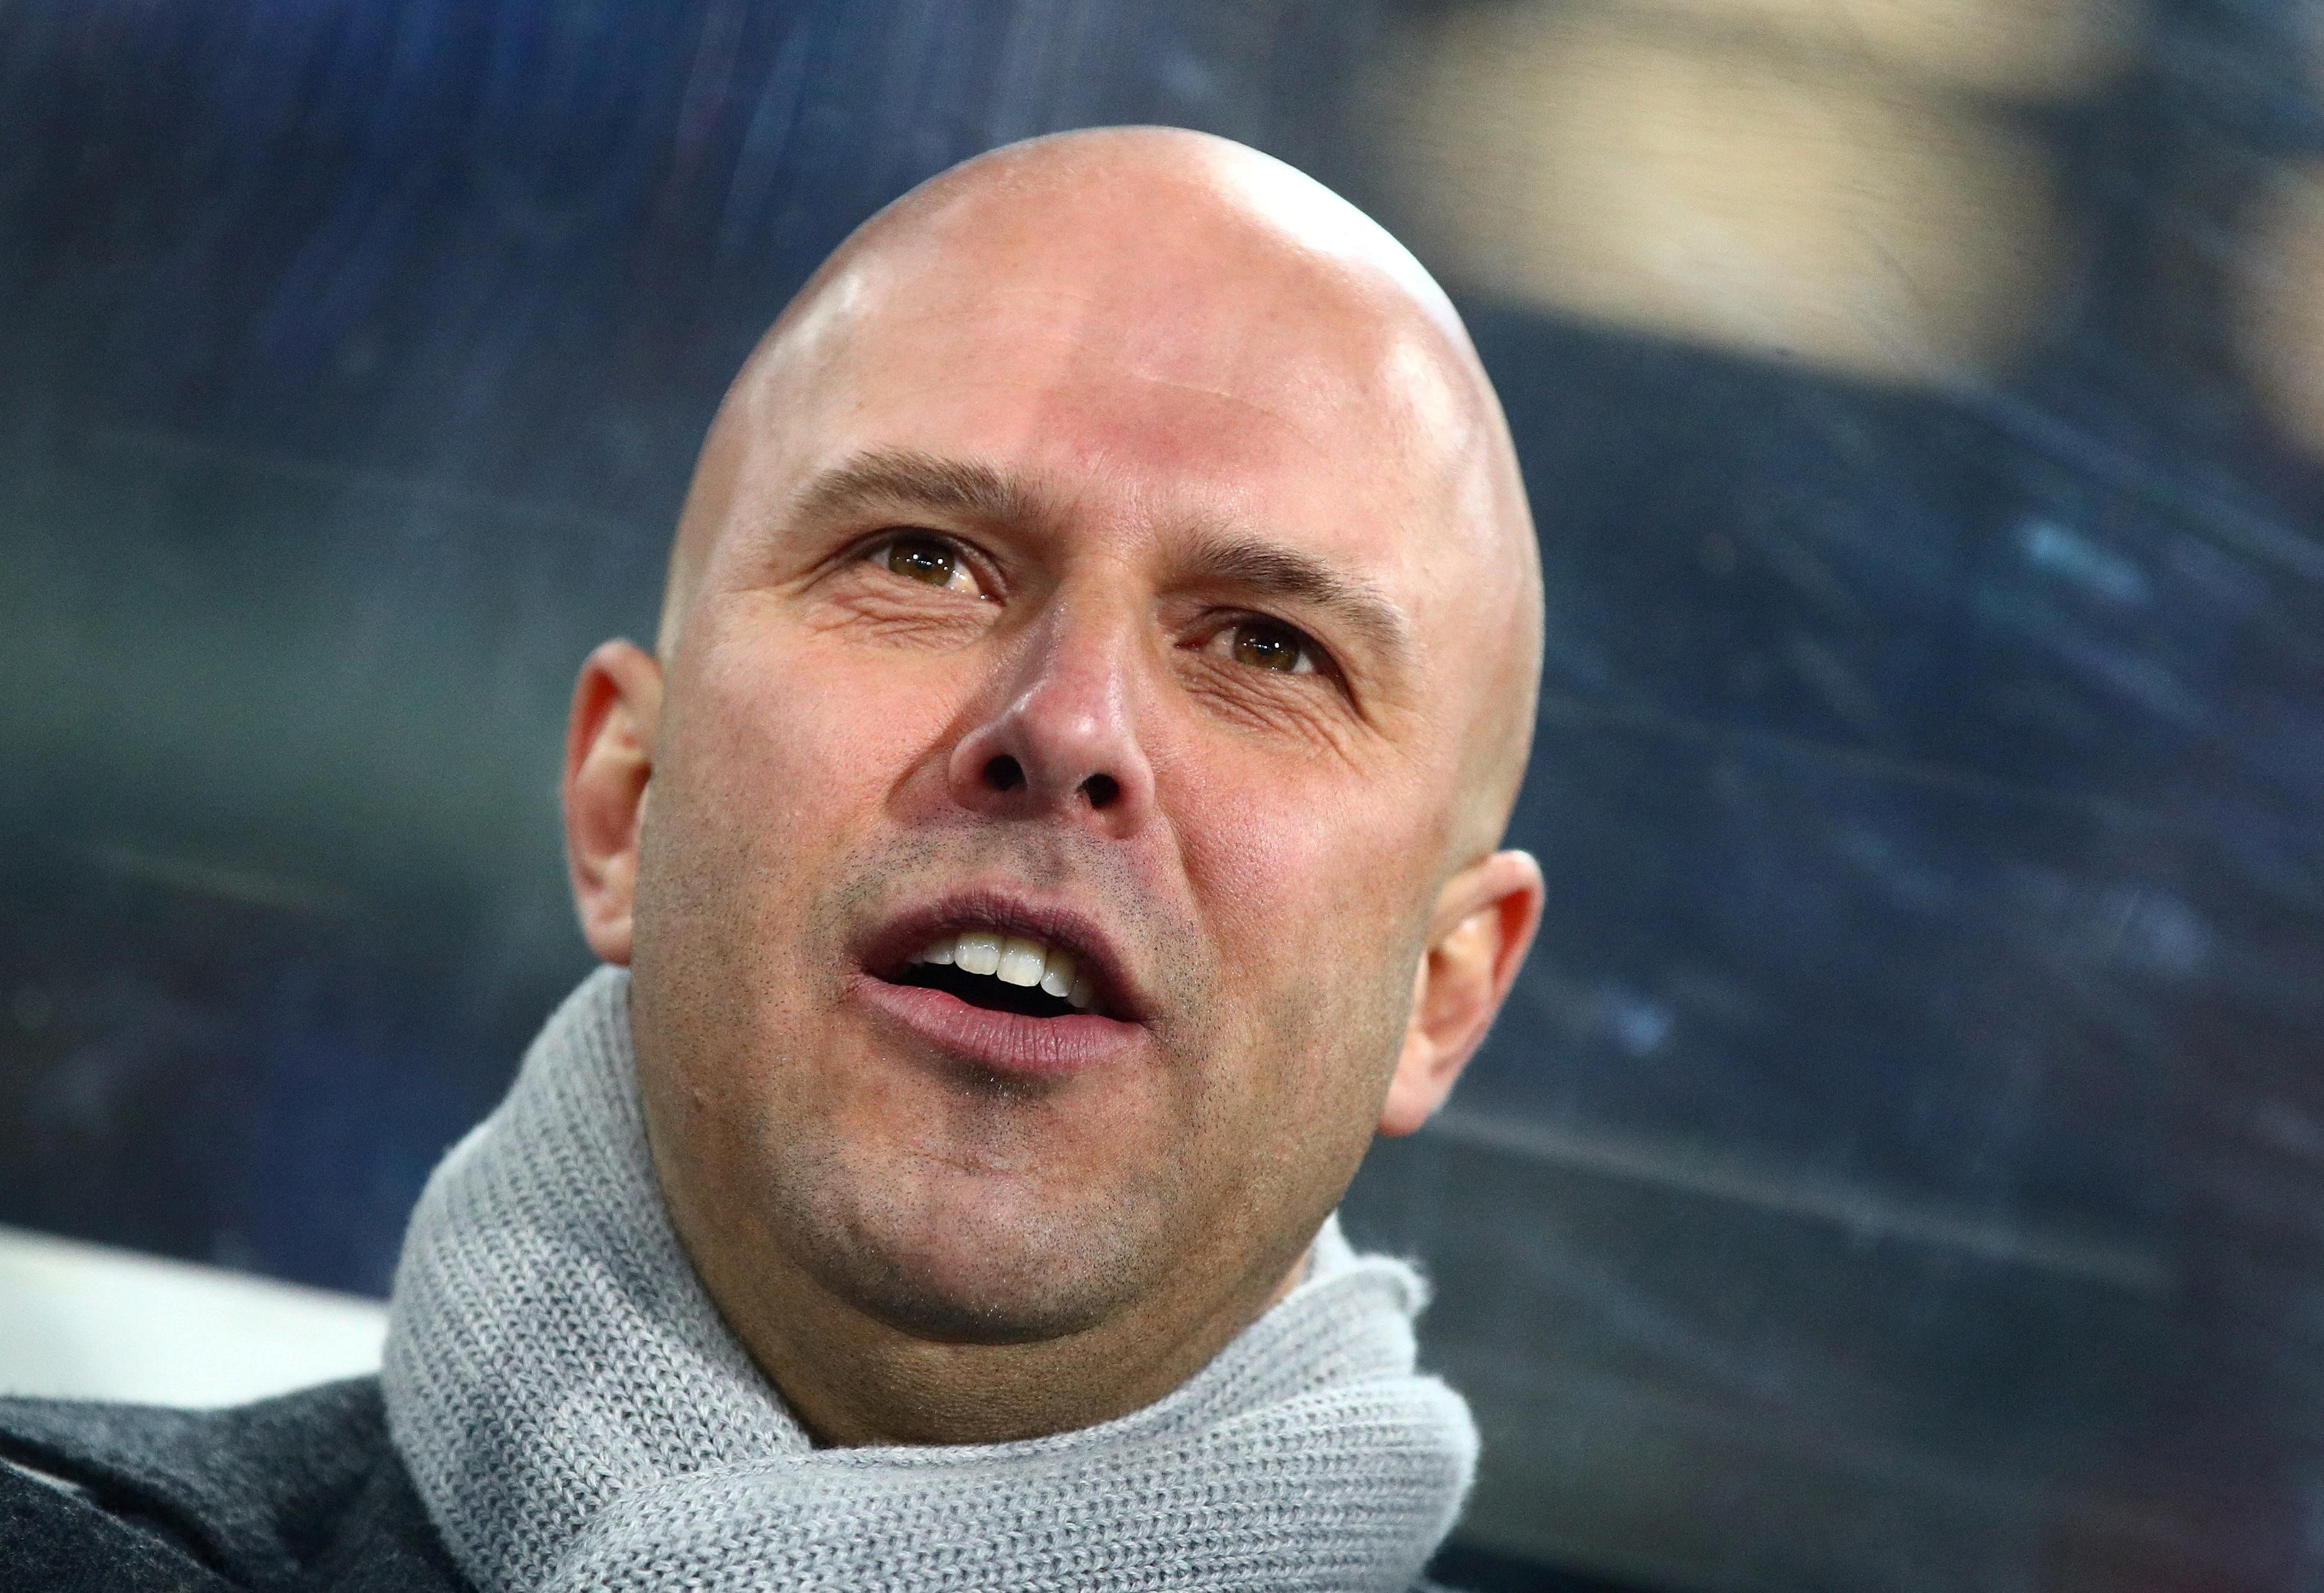 Feyenoord’s Arne Slot ‘confident’ of Liverpool job as negotiations take place